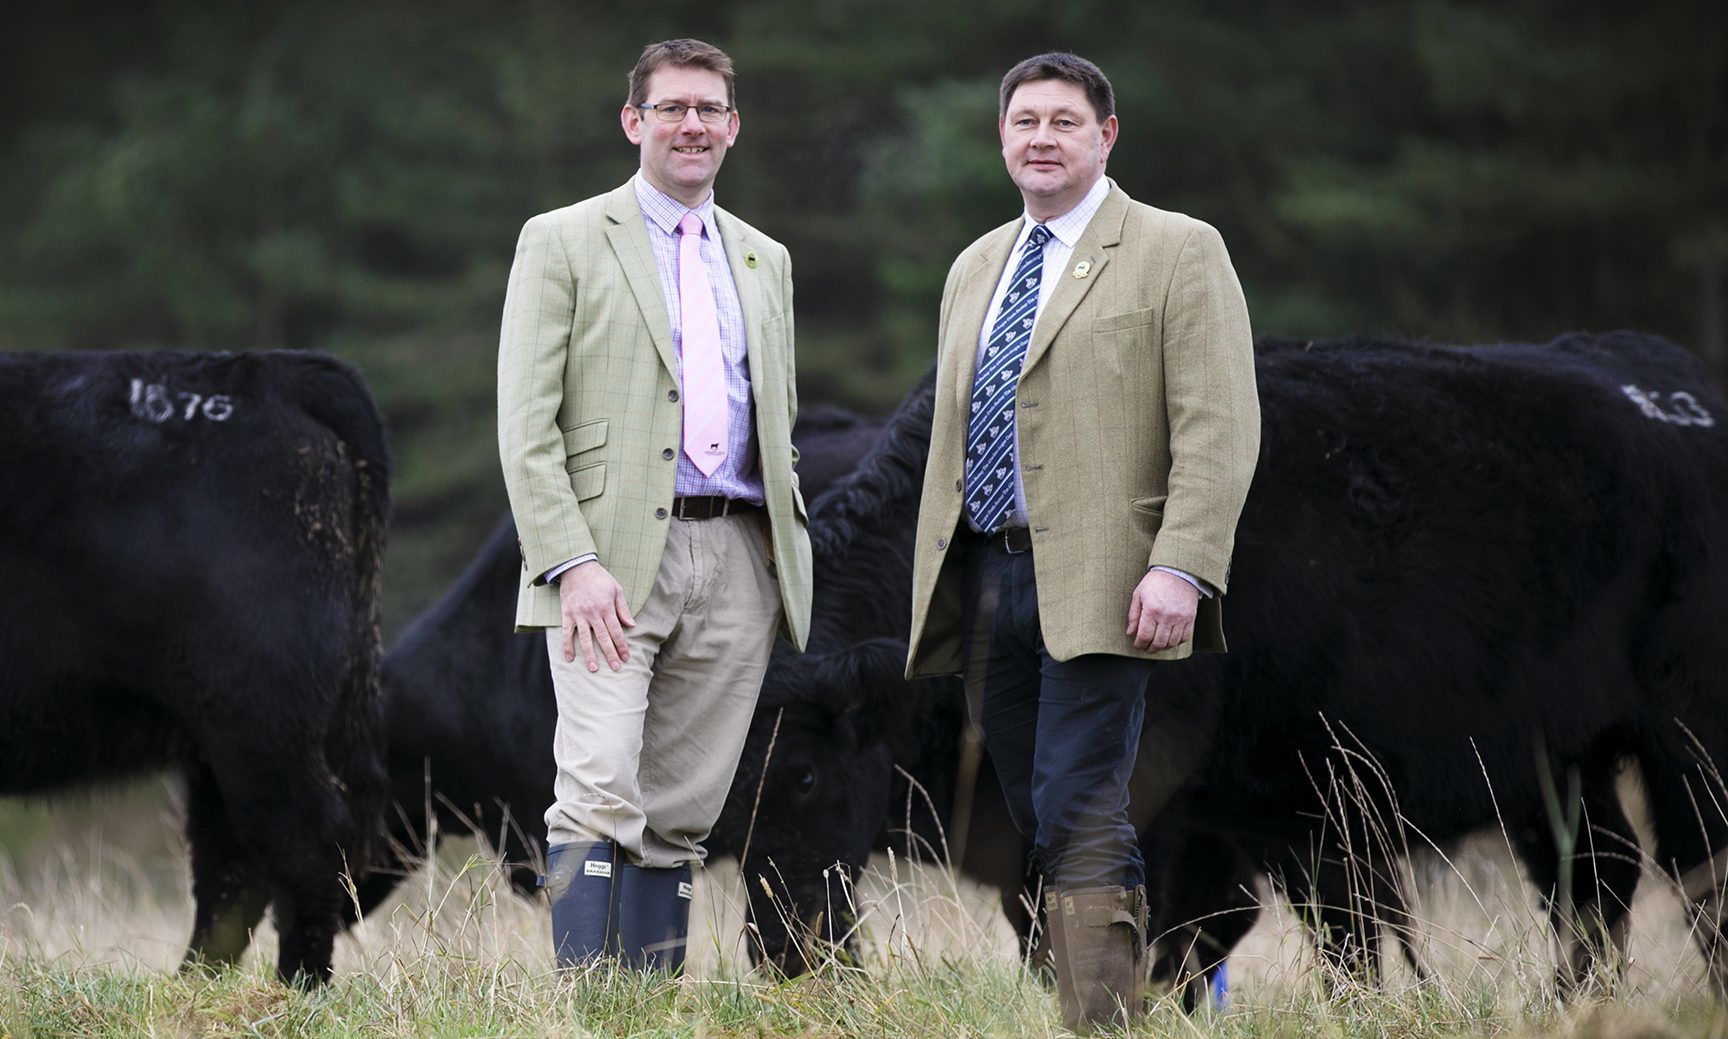 Aberdeen Angus Cattle Society chief executive Johnny Mackey and World Angus Forum organising committee chairman Alex Sanger